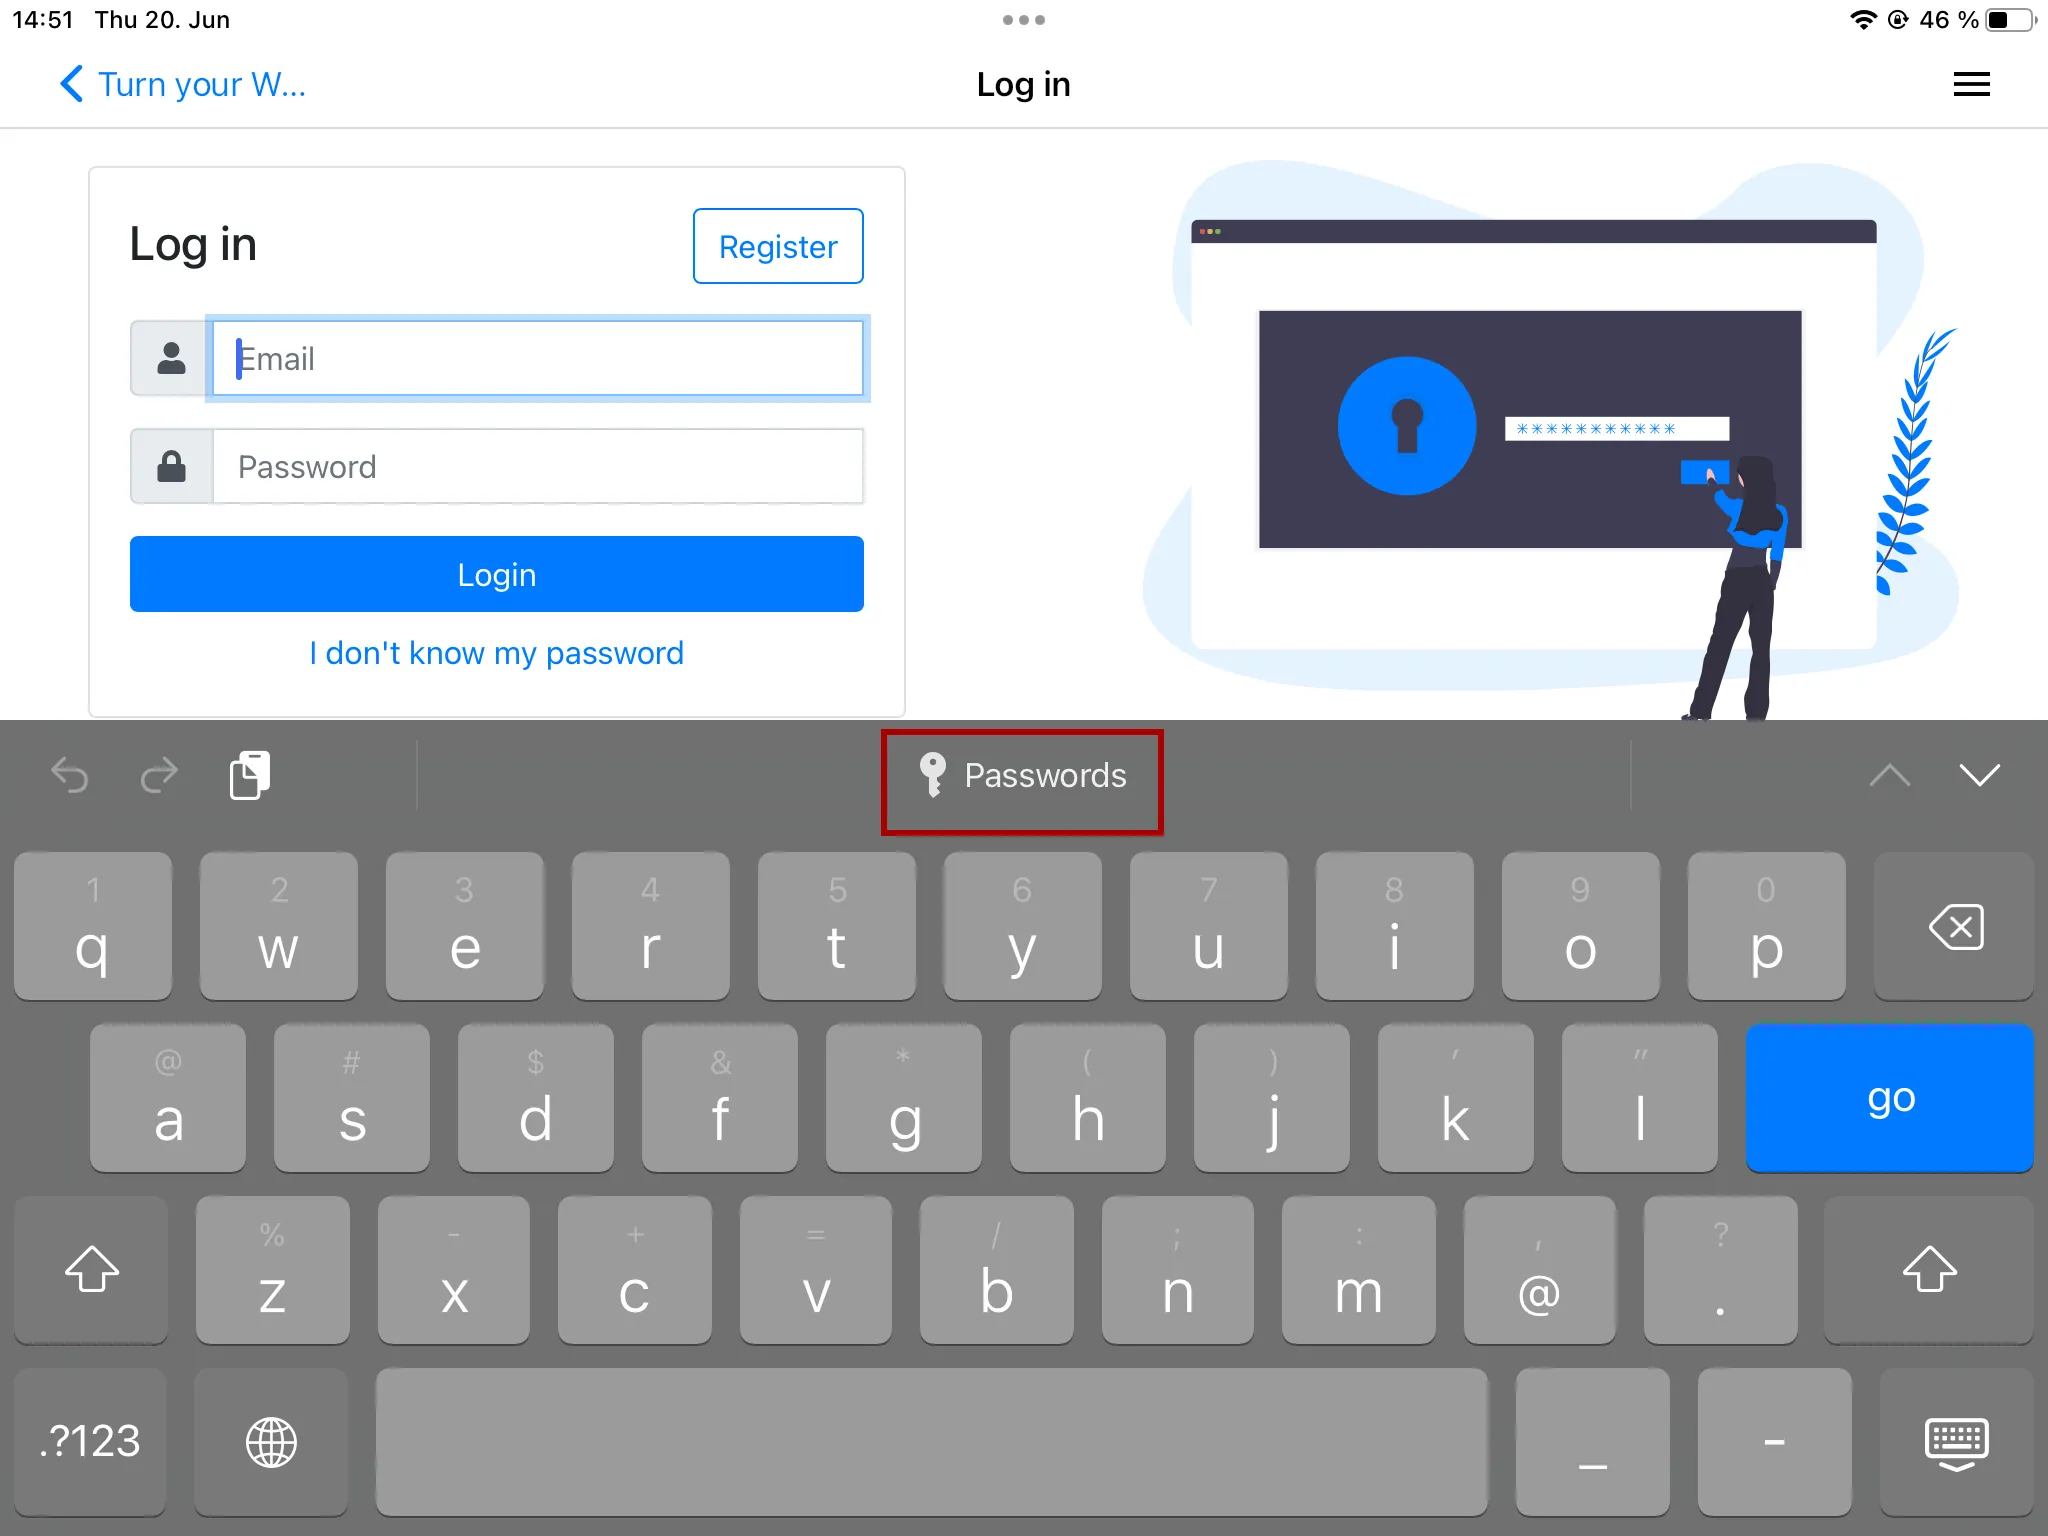 A screenshot of the iOS keyboard offering to automatically fill out the login details through the Keychain app.